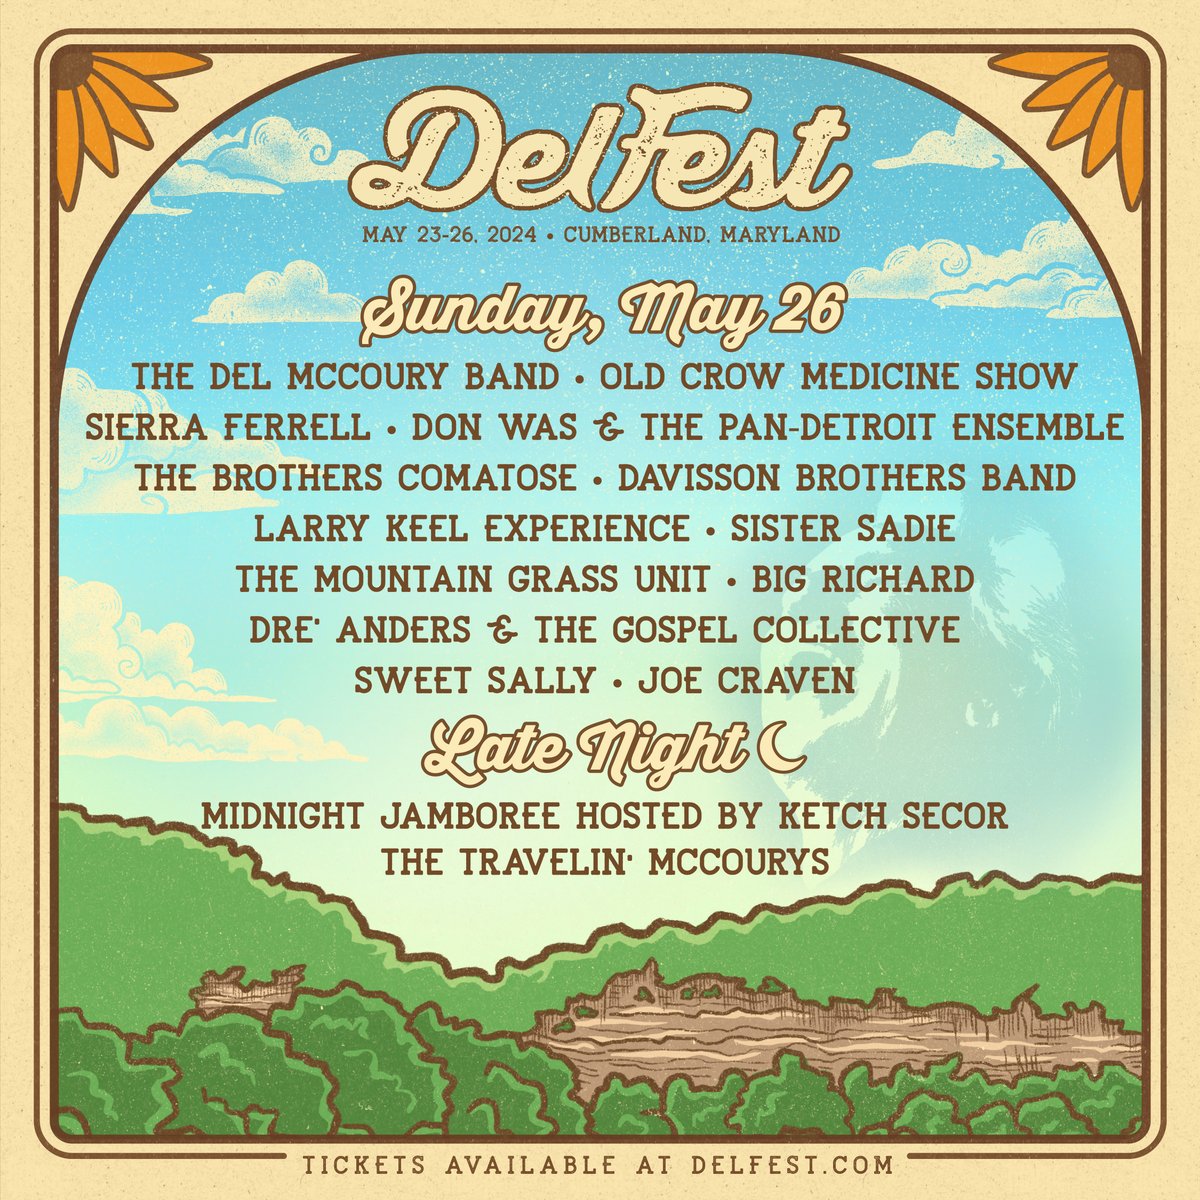 We’re in the home stretch now ⚾ Which dates will we see you at @DelFest?
#delmccouryband #delfest #delyeah